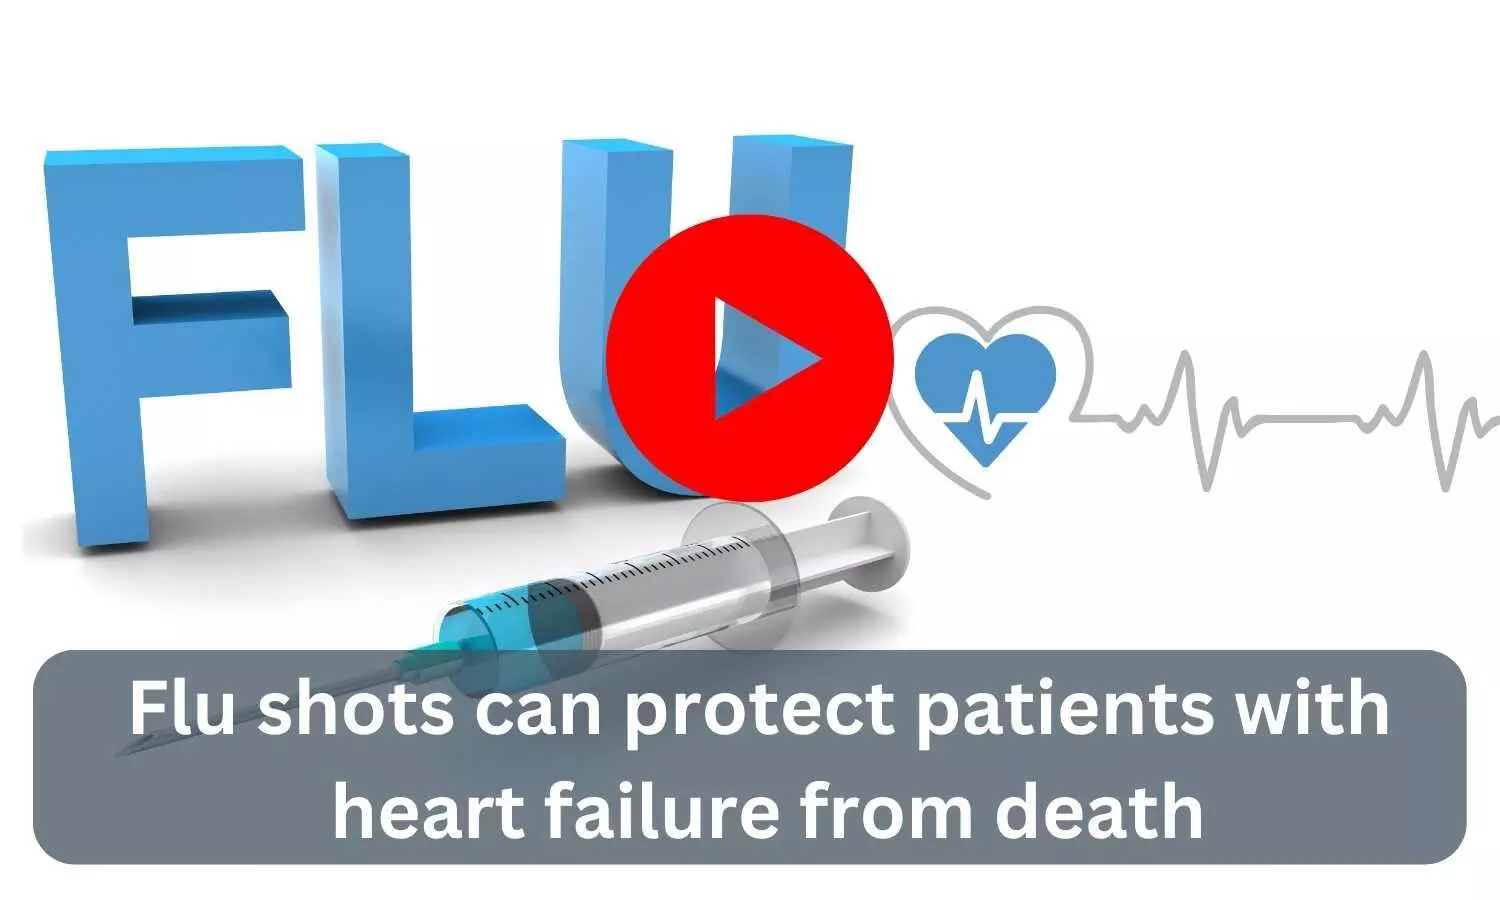 Flu shots can protect patients with heart failure from death